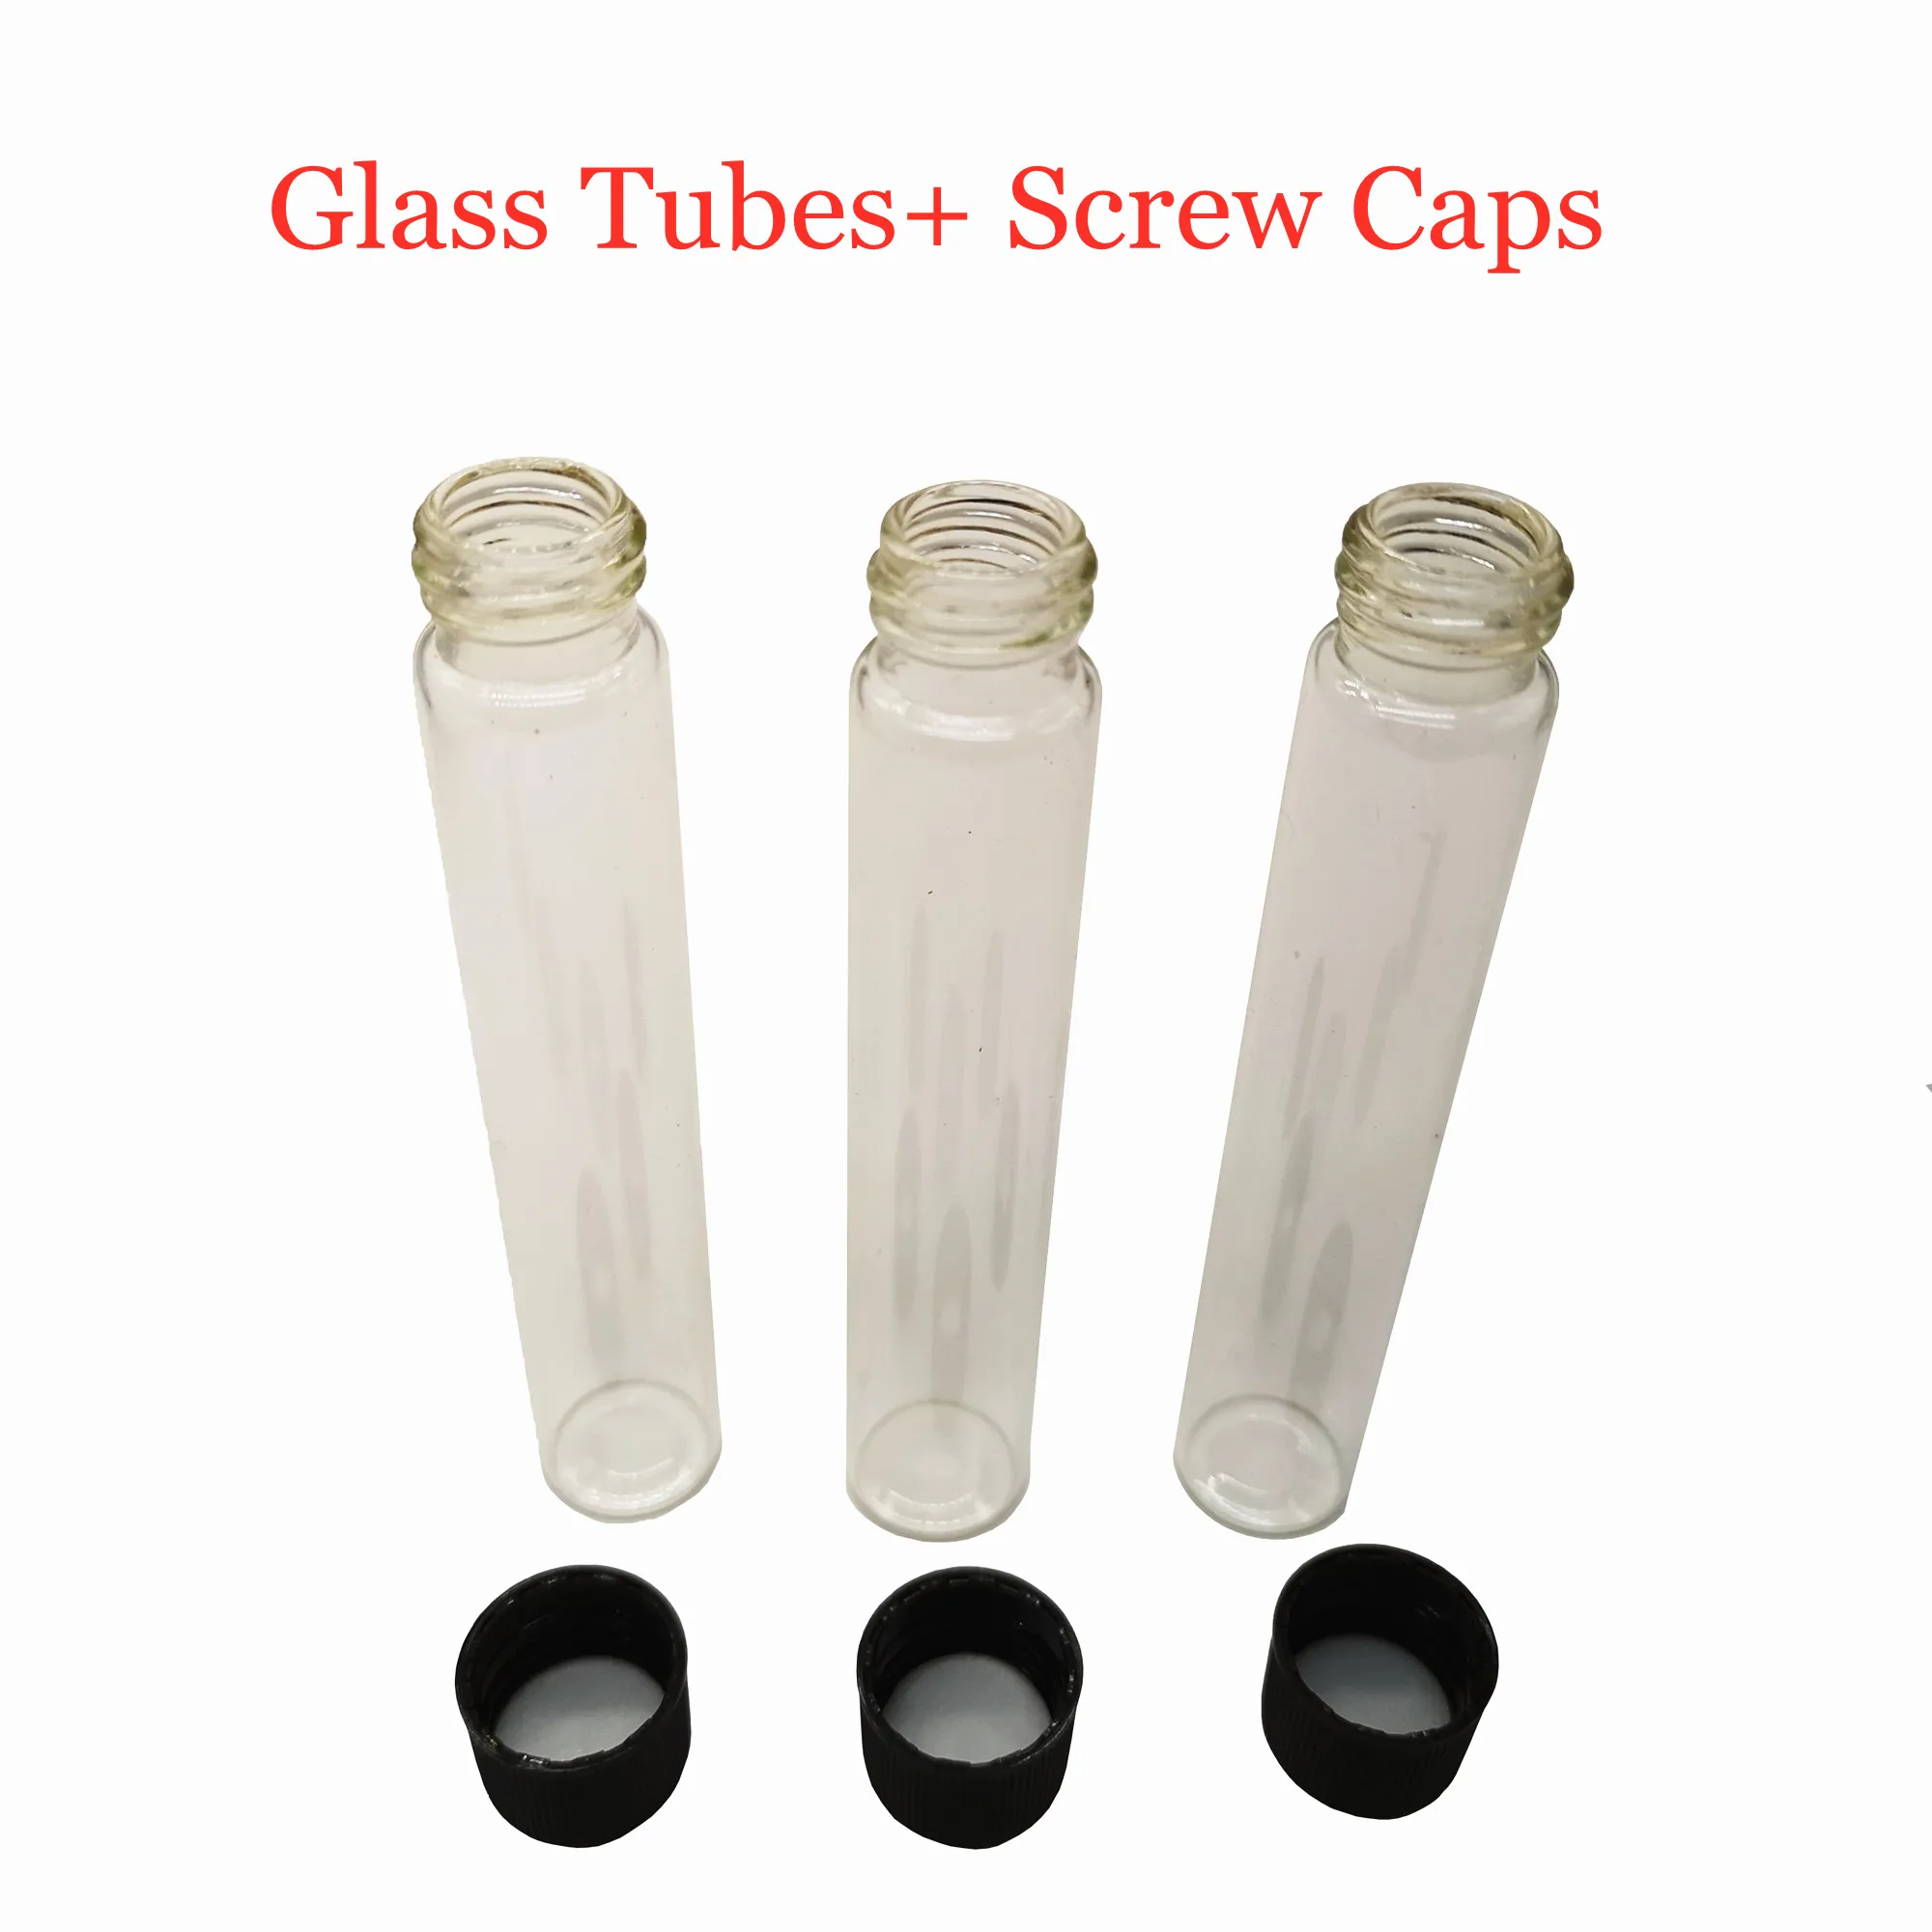 Custom Printing Customize Packaging Bottles Glass Tubes with Lids Screw Caps Empty OEM Label